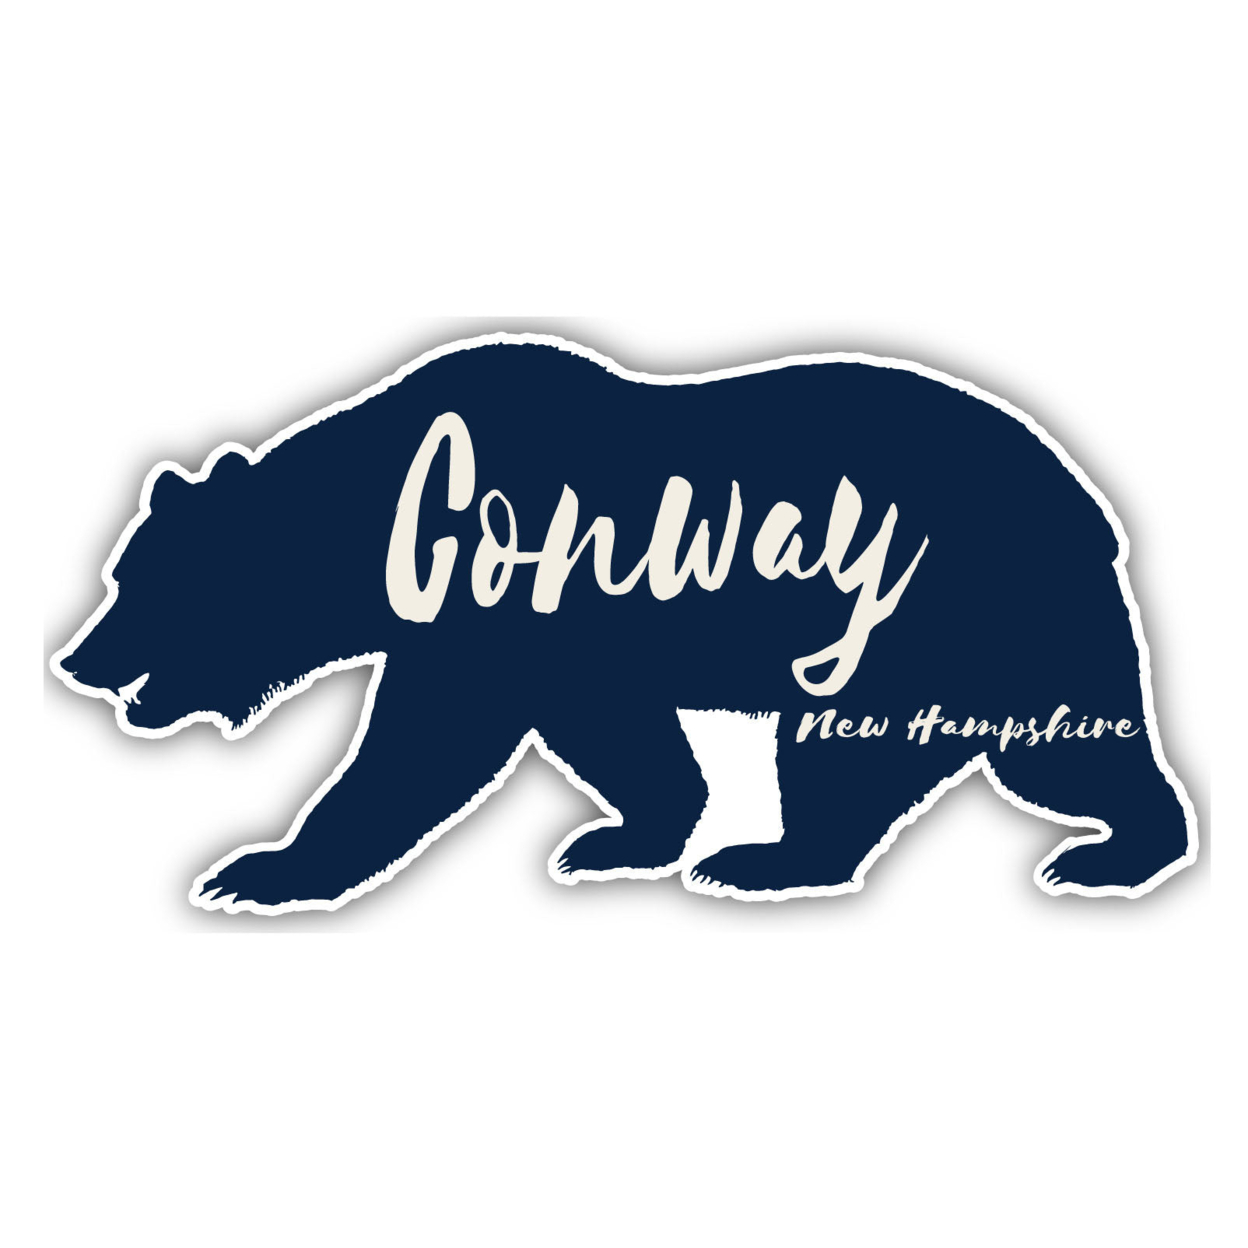 Conway New Hampshire Souvenir Decorative Stickers (Choose Theme And Size) - 4-Pack, 2-Inch, Great Outdoors